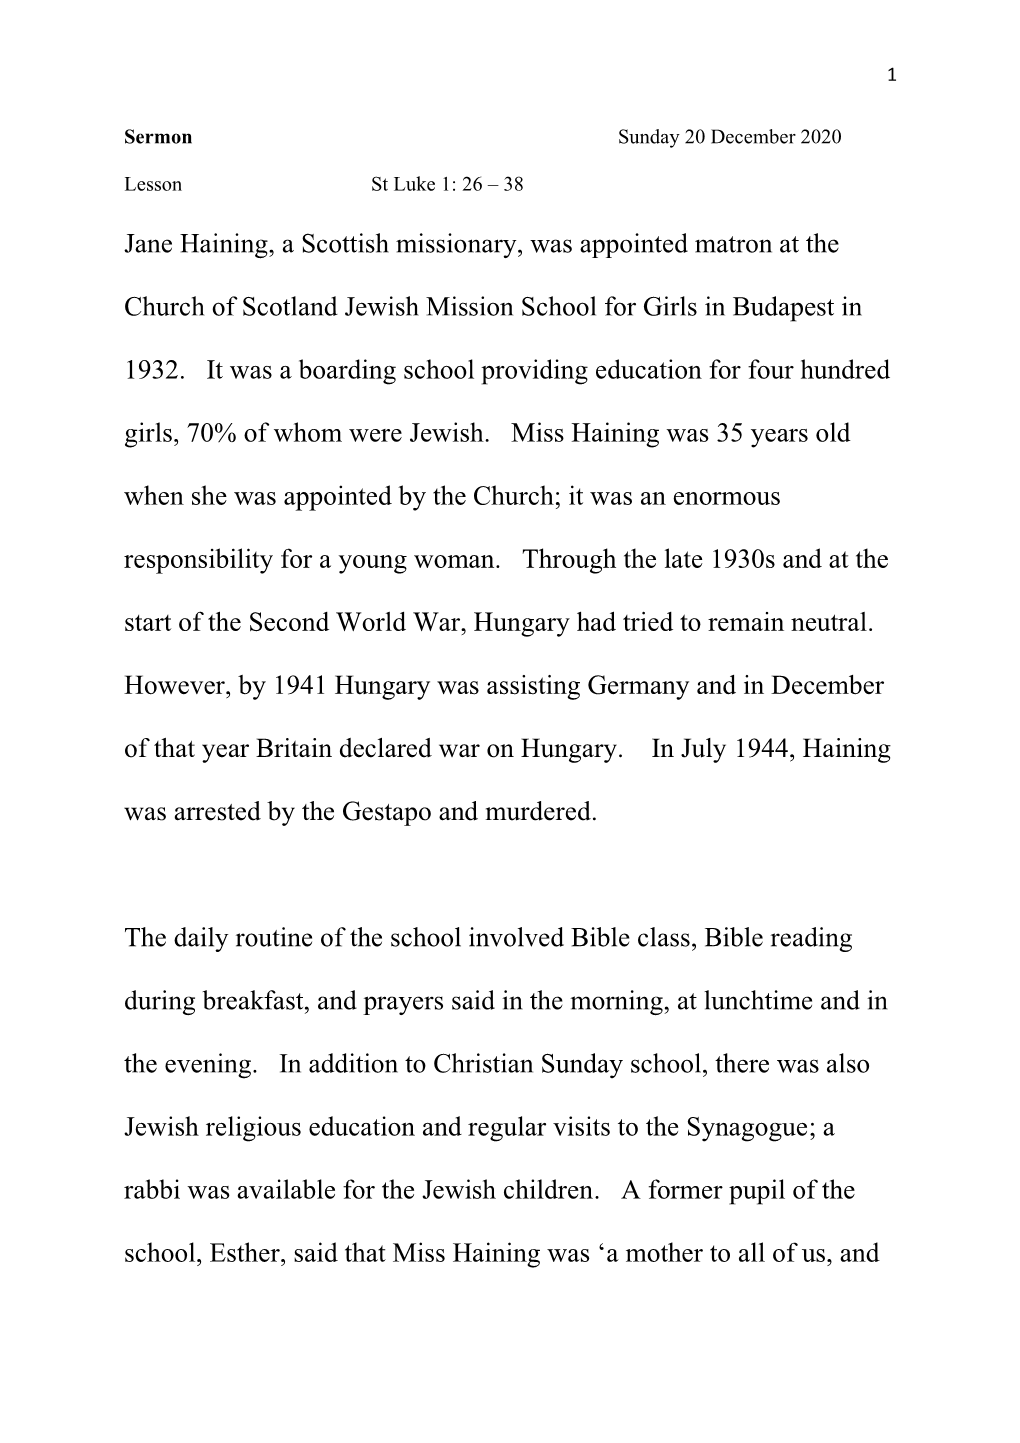 Jane Haining, a Scottish Missionary, Was Appointed Matron at the Church of Scotland Jewish Mission School for Girls in Budapest